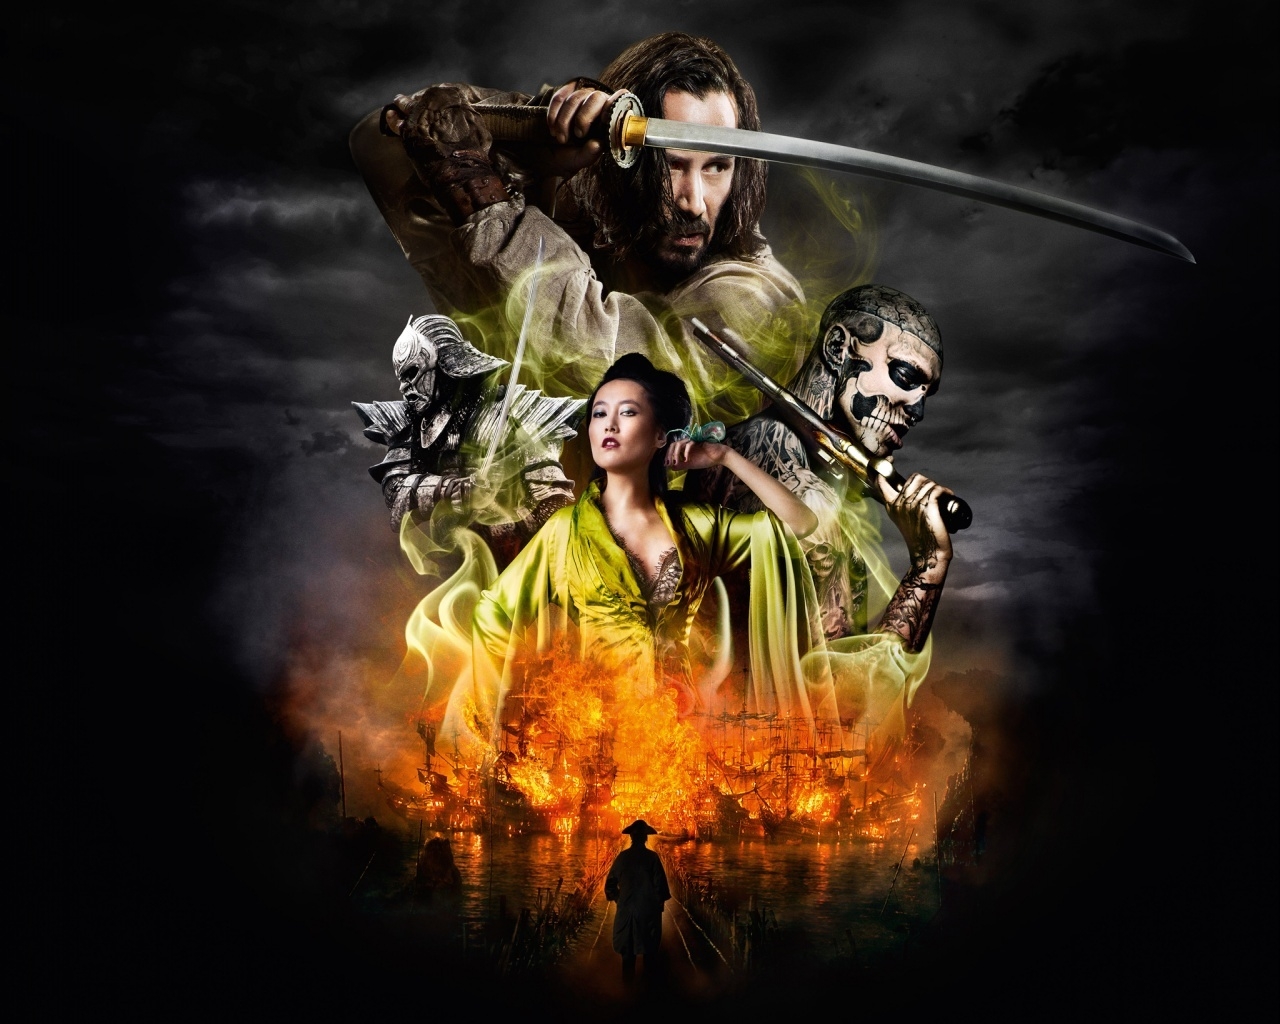 47 Ronin for 1280 x 1024 resolution